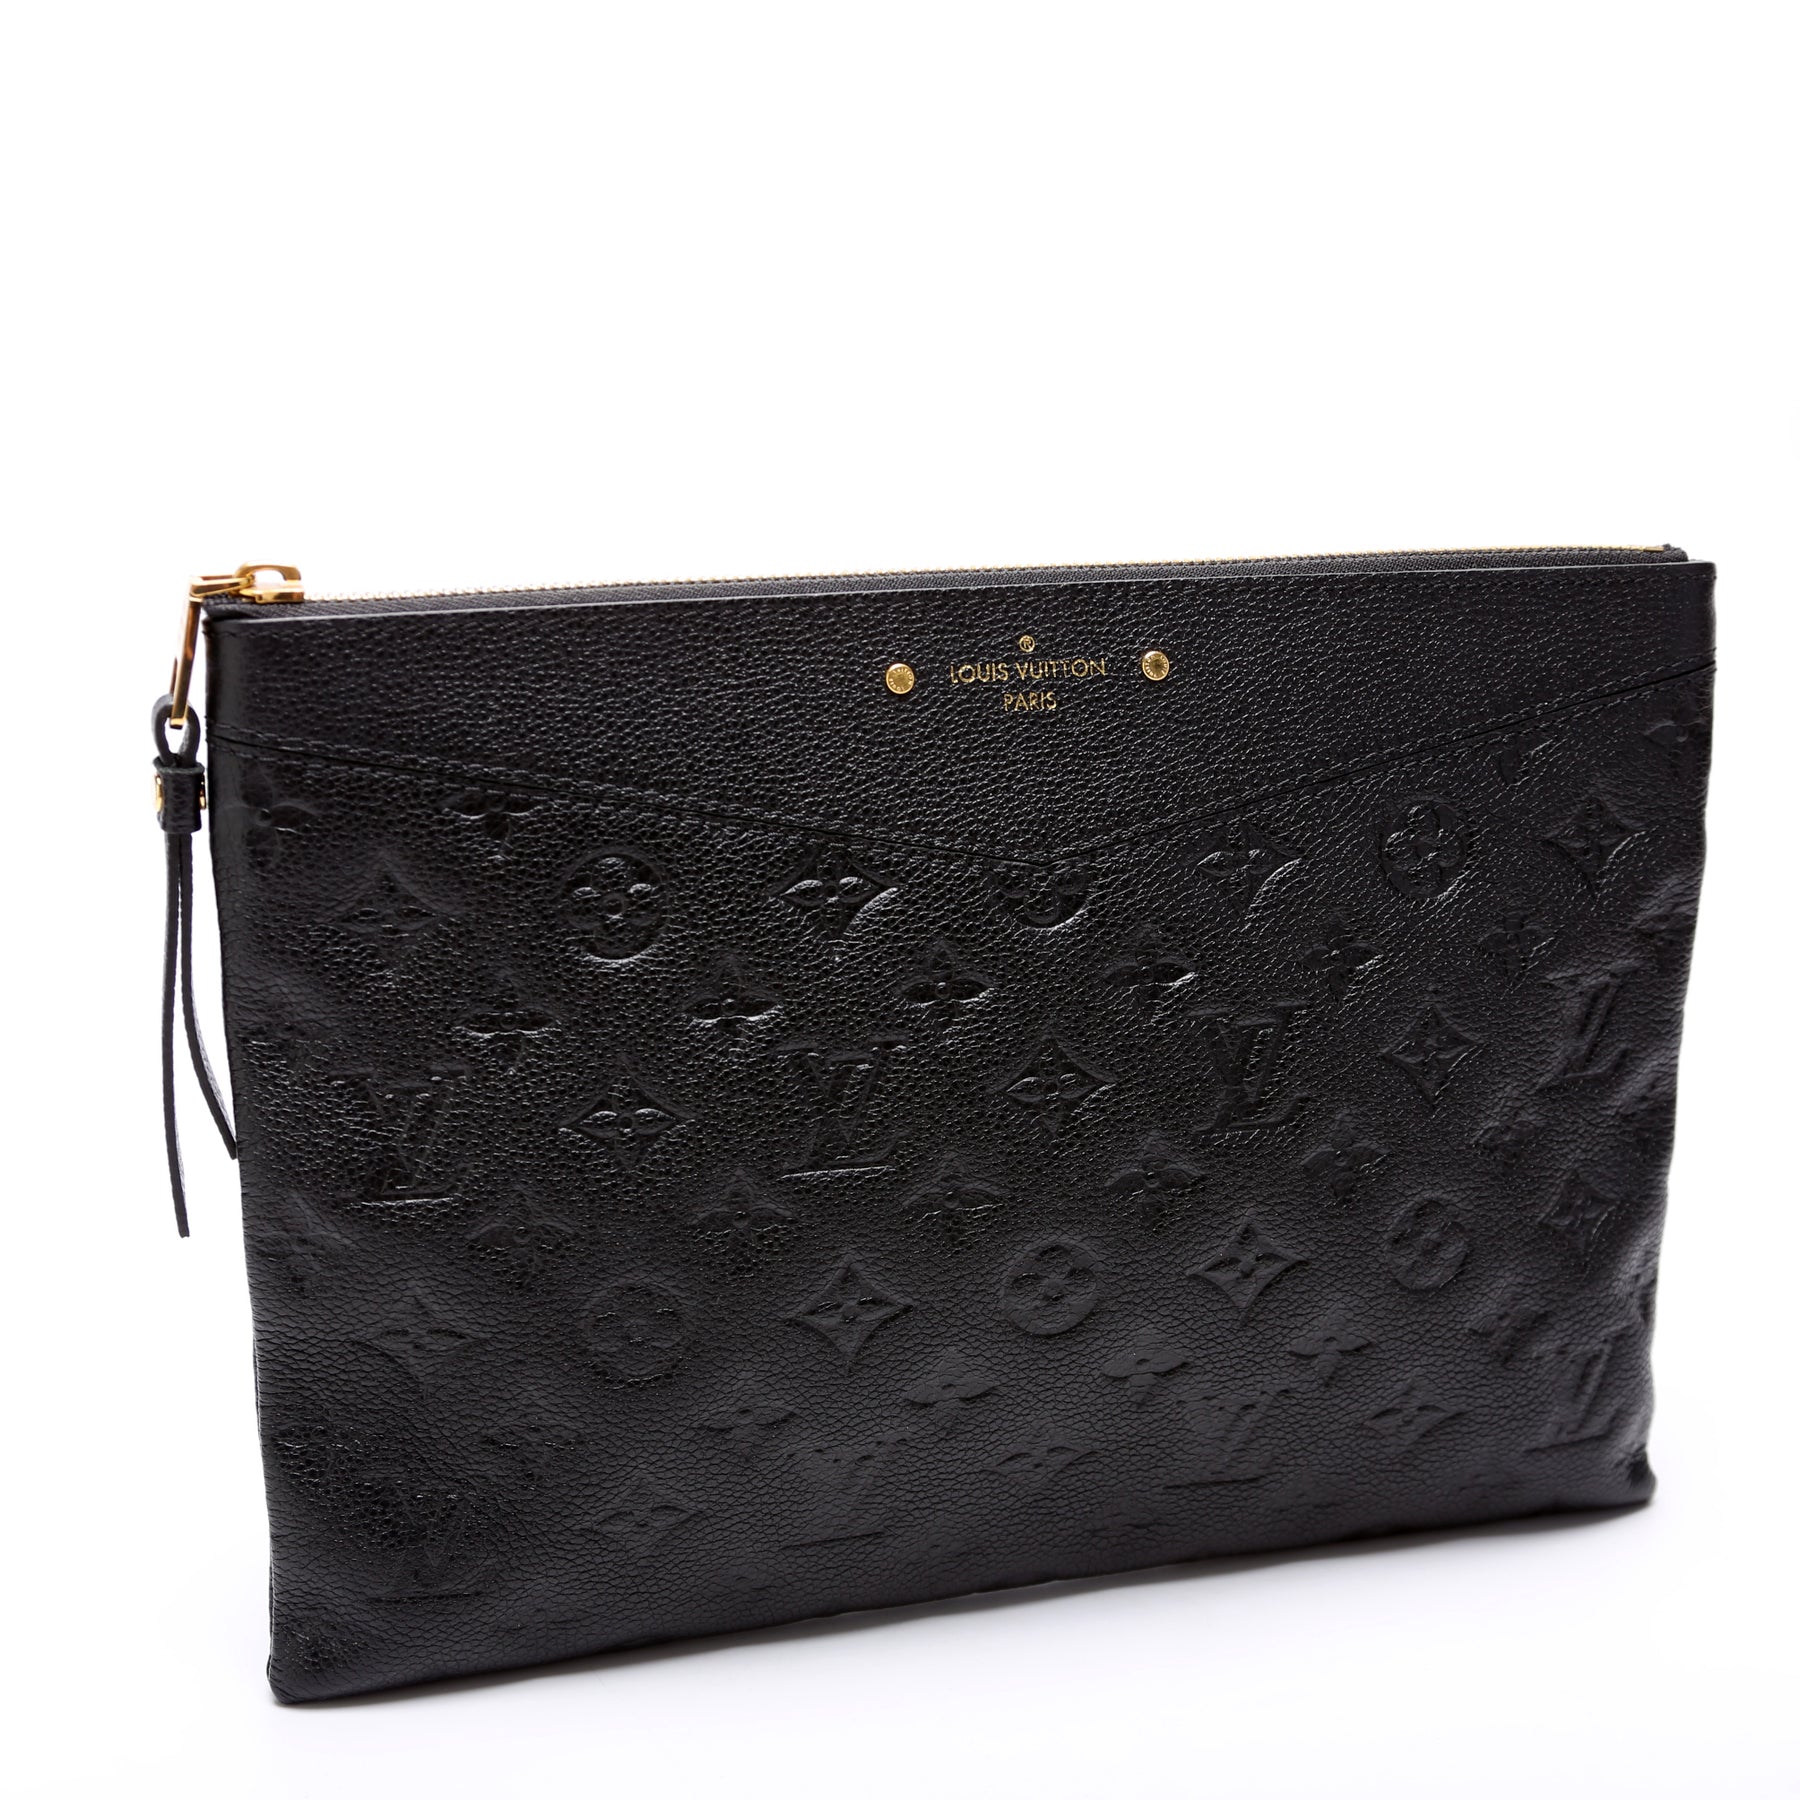 Anyone have the Daily Pouch in Empreinte?